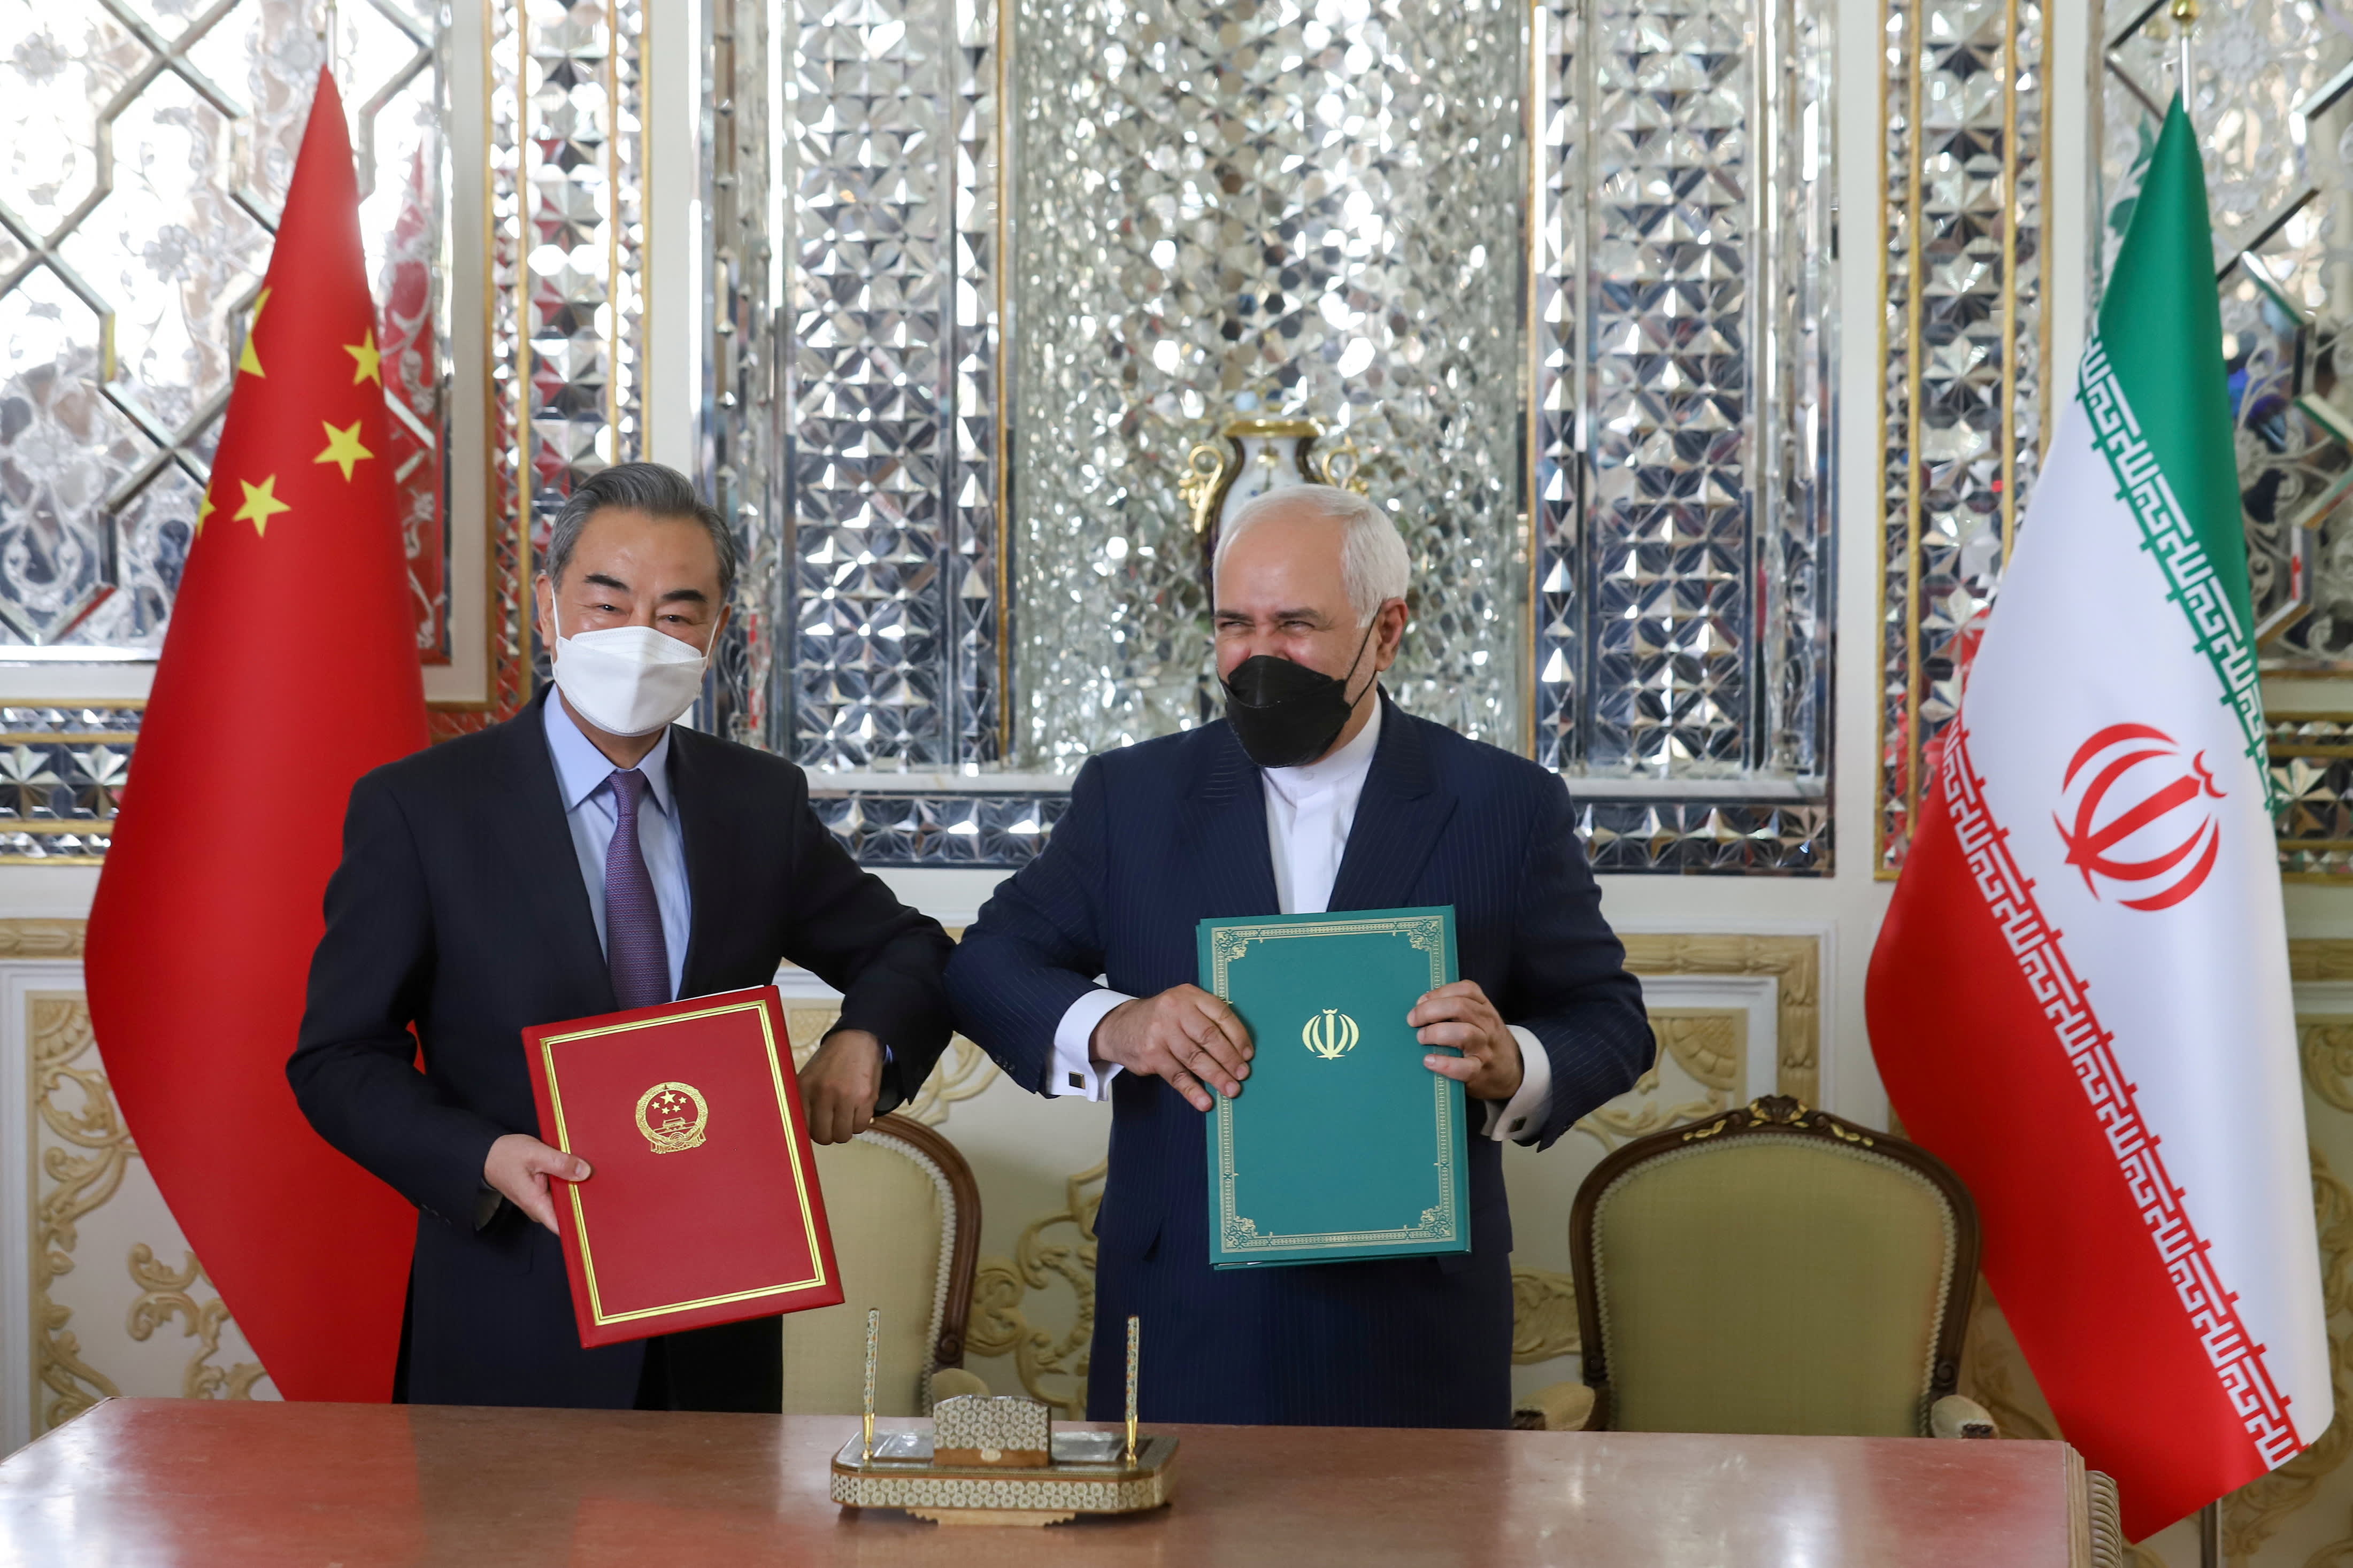 Iran and China sign agreement aimed at strengthening their economic and political alliance